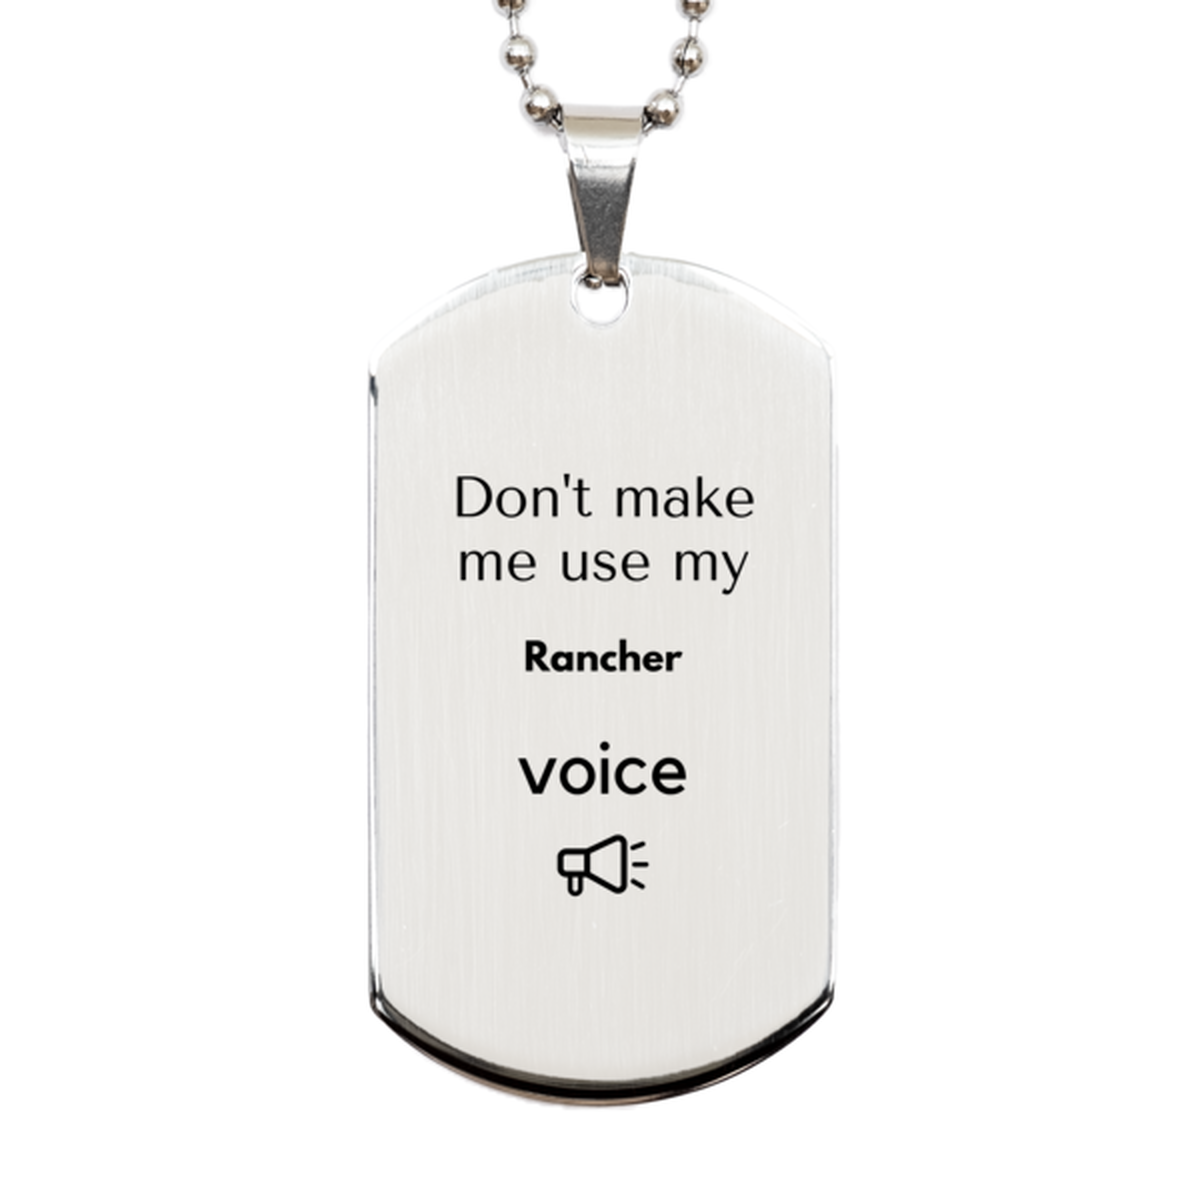 Don't make me use my Rancher voice, Sarcasm Rancher Gifts, Christmas Rancher Silver Dog Tag Birthday Unique Gifts For Rancher Coworkers, Men, Women, Colleague, Friends